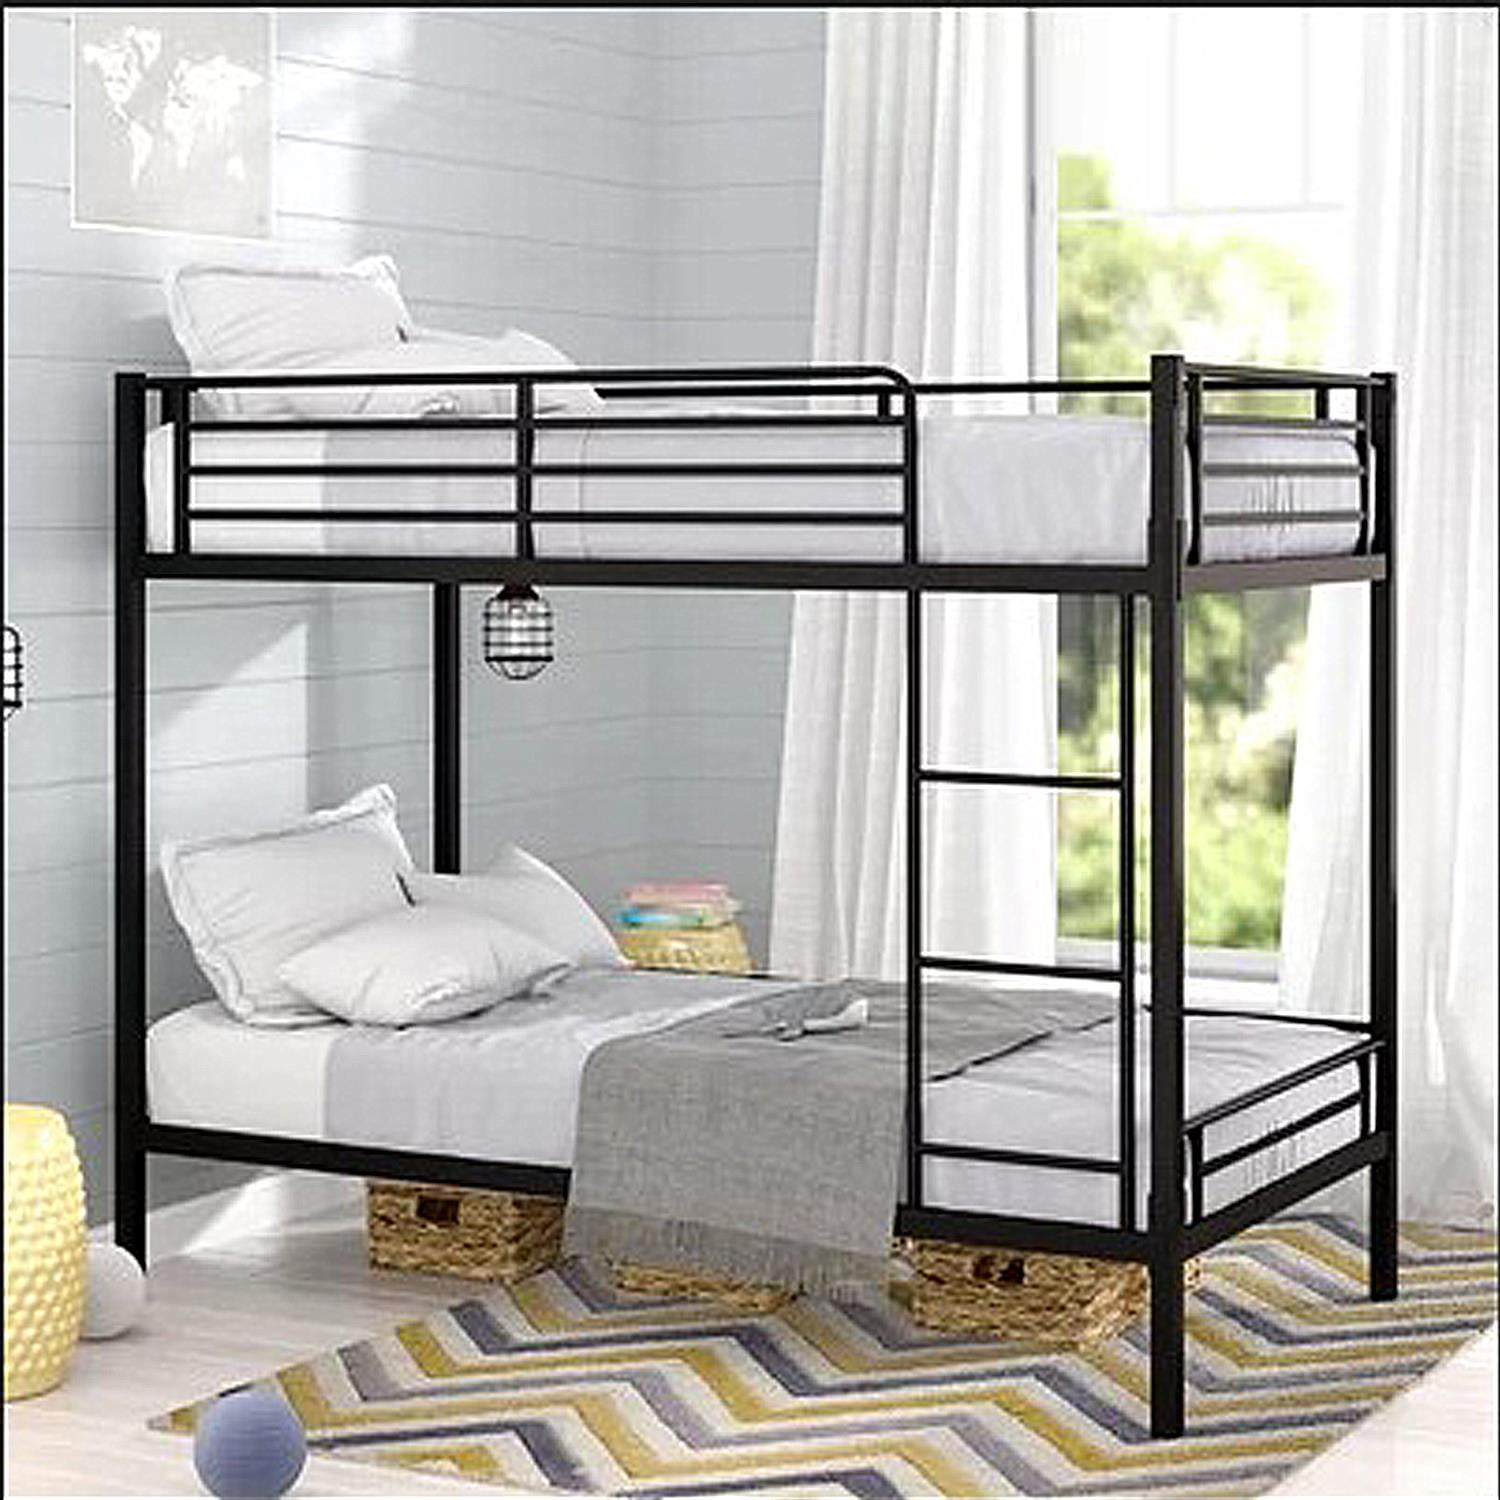 Ktaxon Twin Over Twin Metal Bunk Bed,Sturdy Frame with Metal Slats for Kids,Black